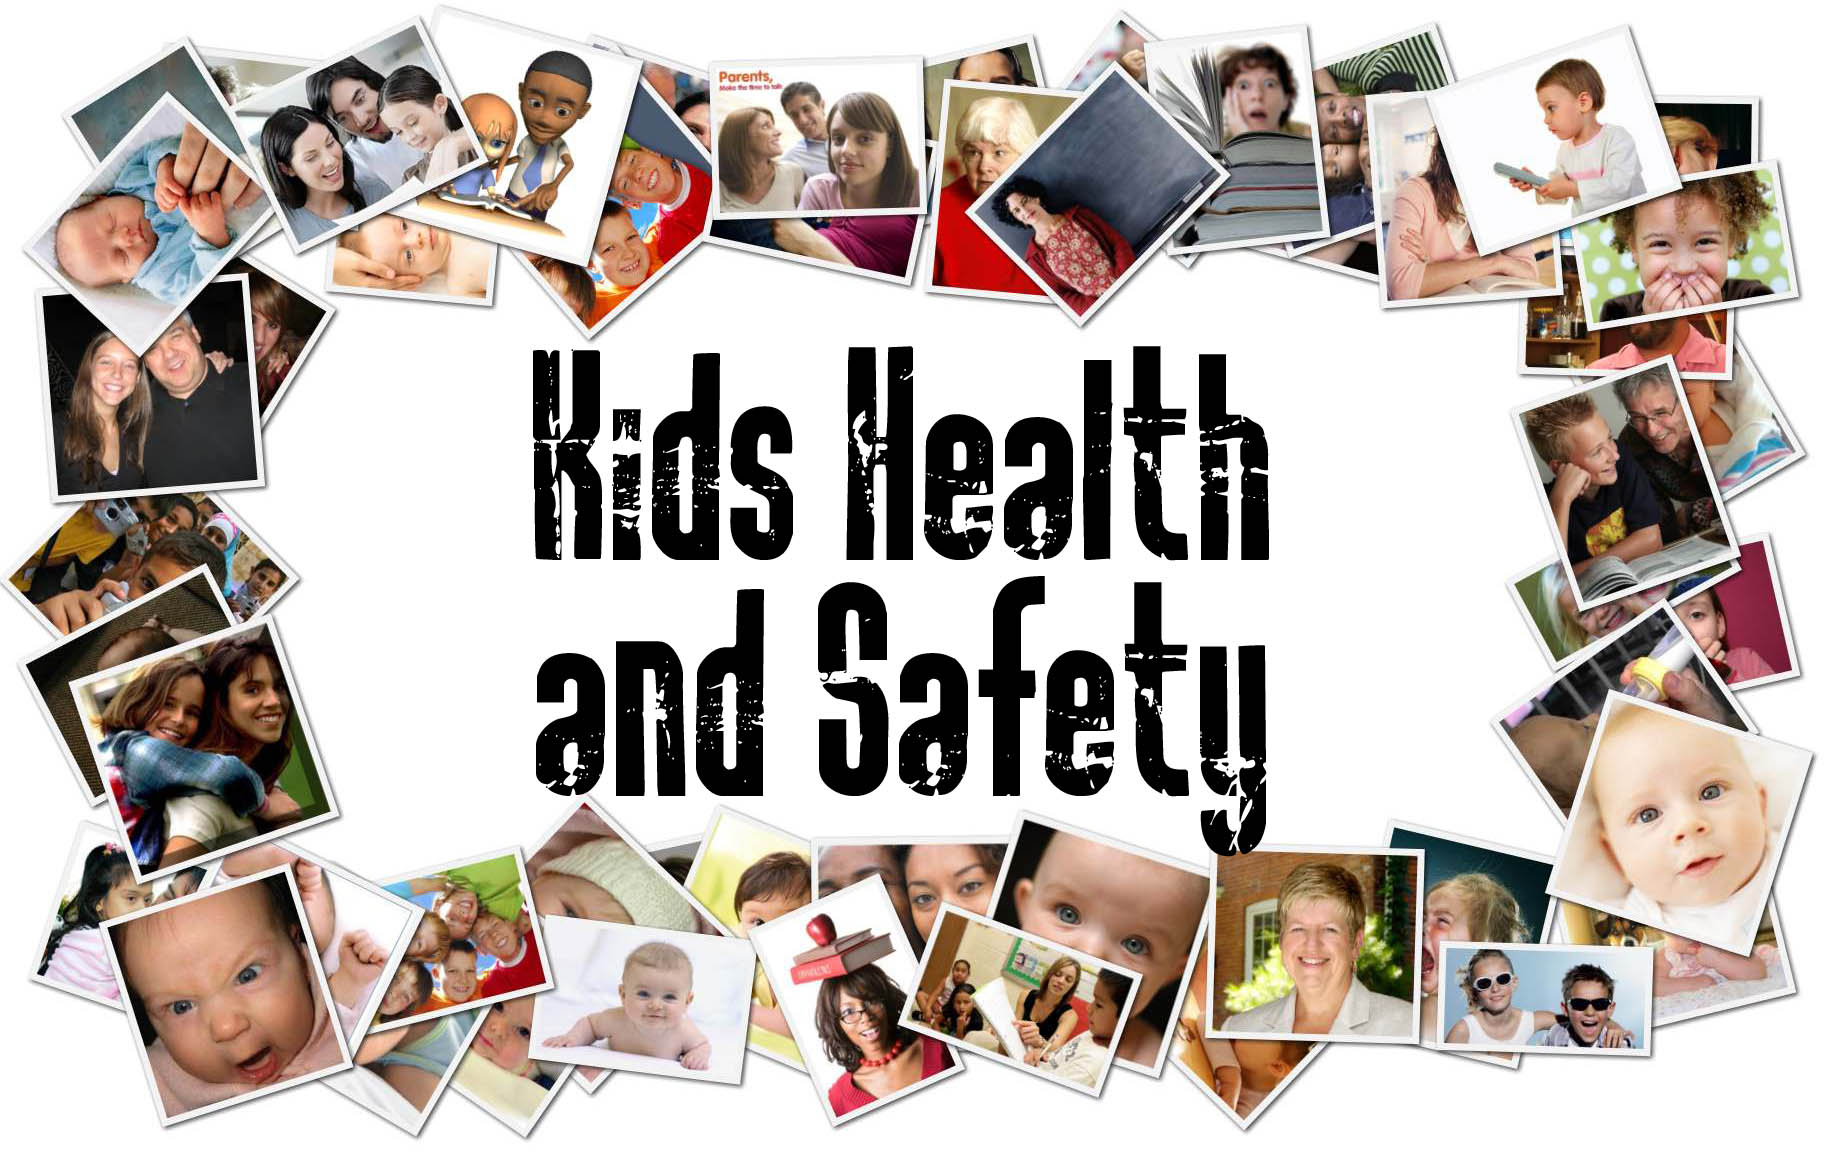 Health+and+safety+pictures+for+children